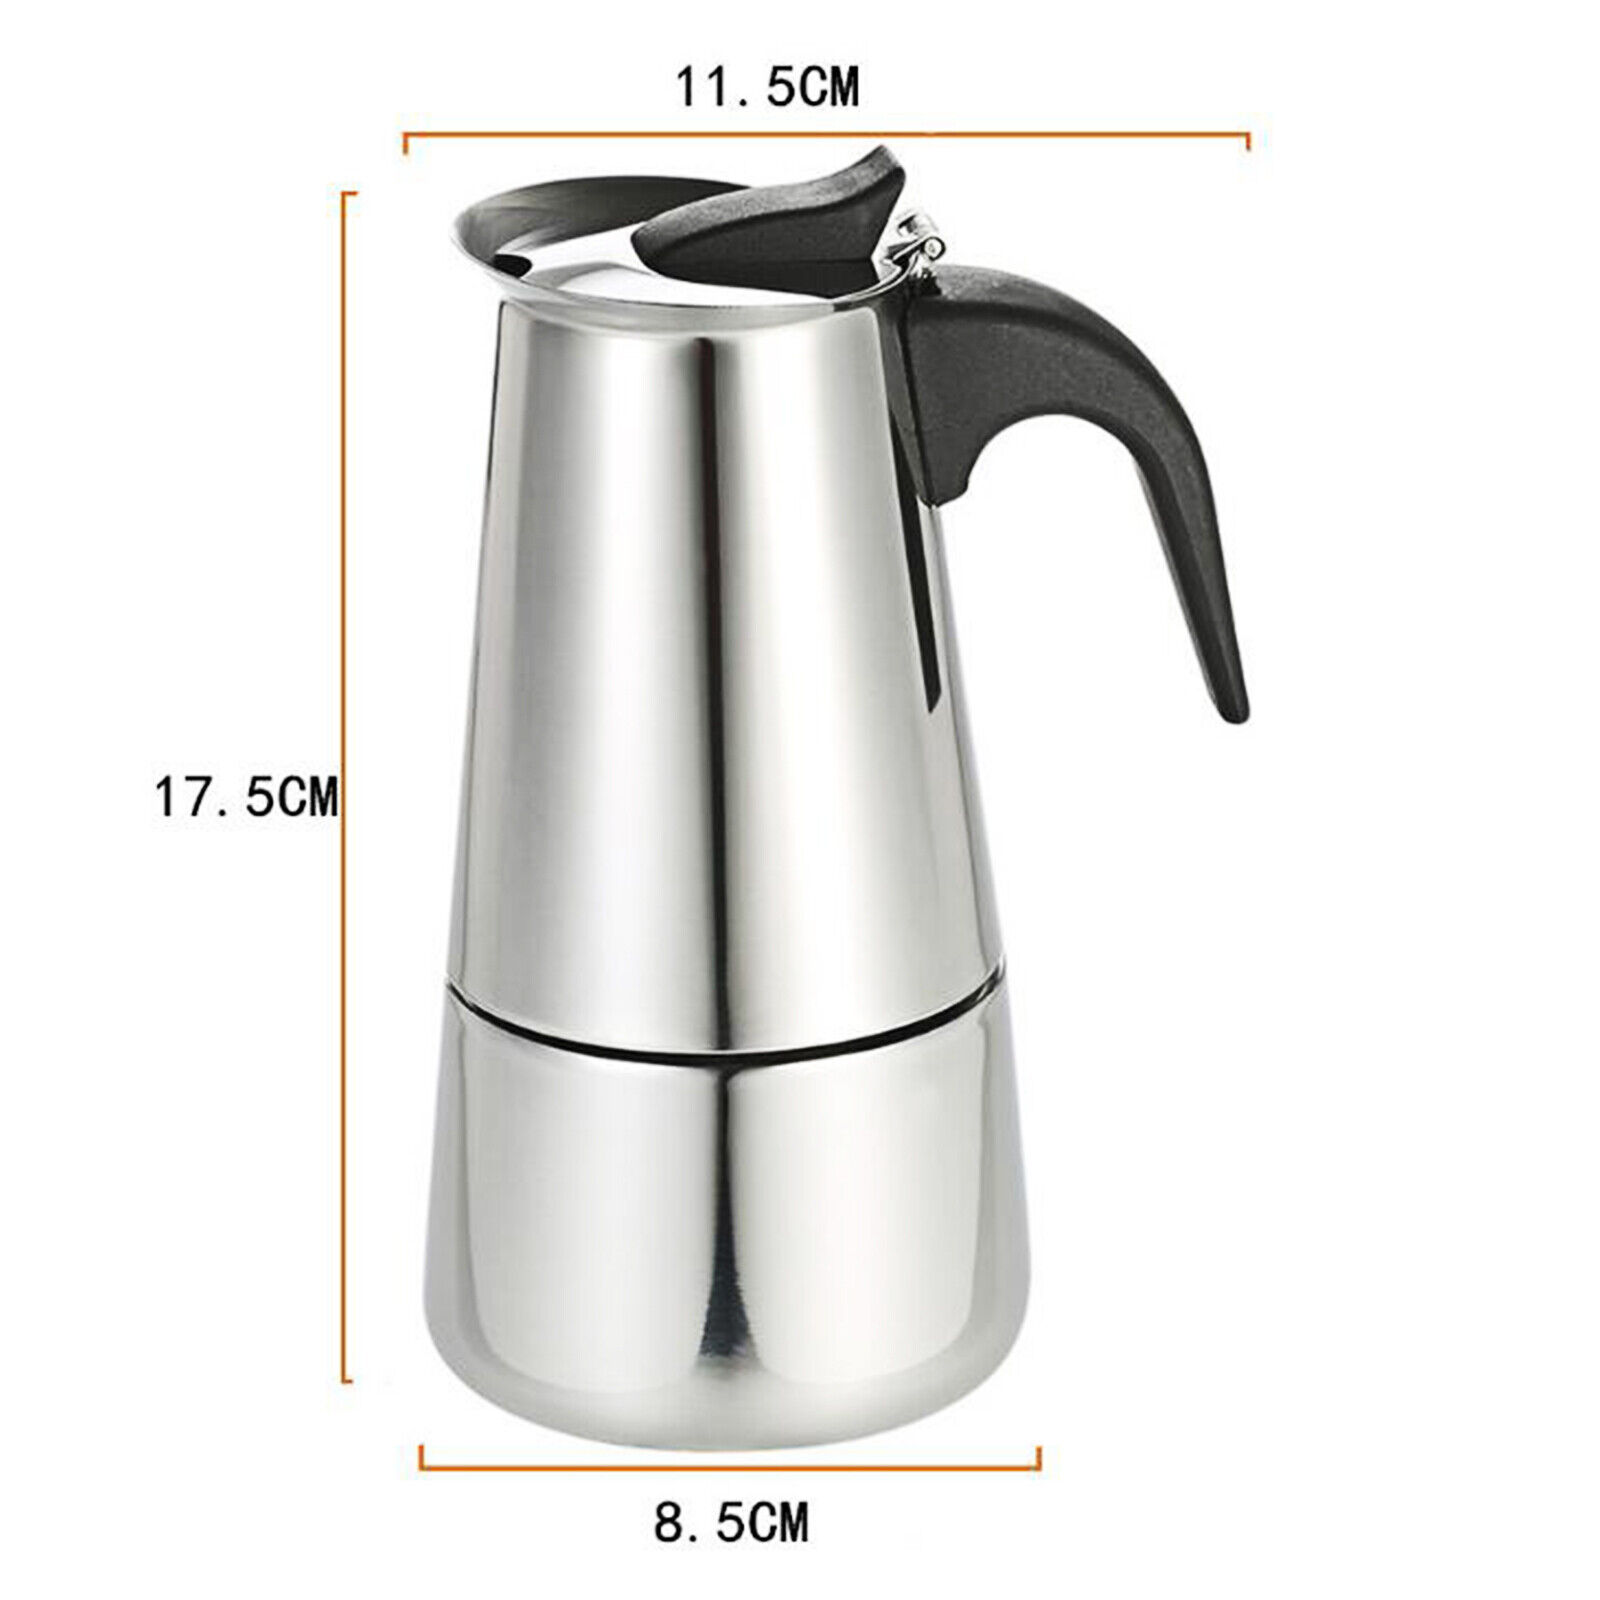 Coffee Maker Pot 4/6/9 Cup Stainless Steel Espresso Percolator Stovetop HOT